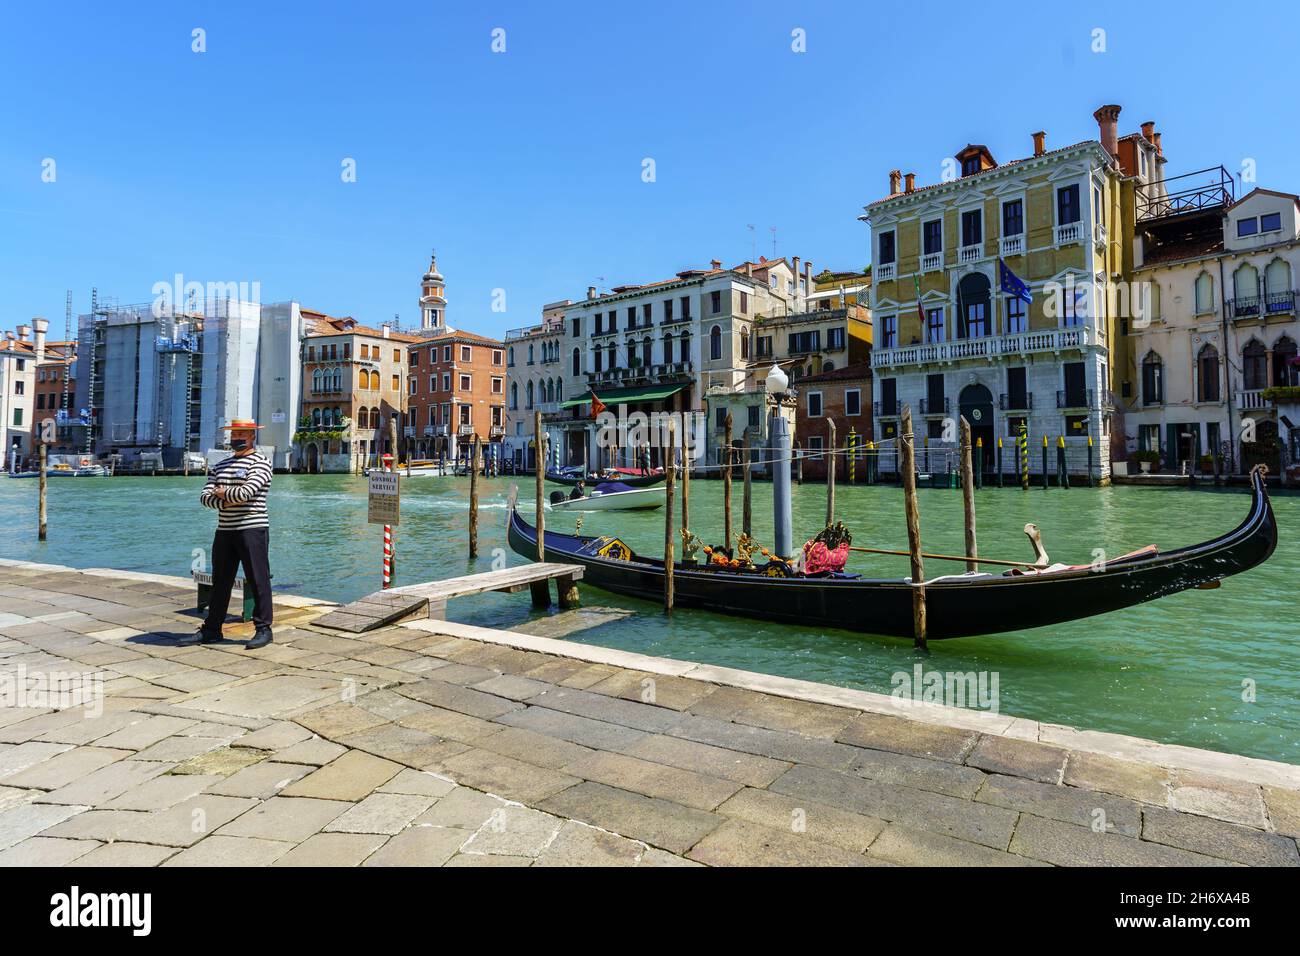 Gondolier waiting for customers Stock Photo